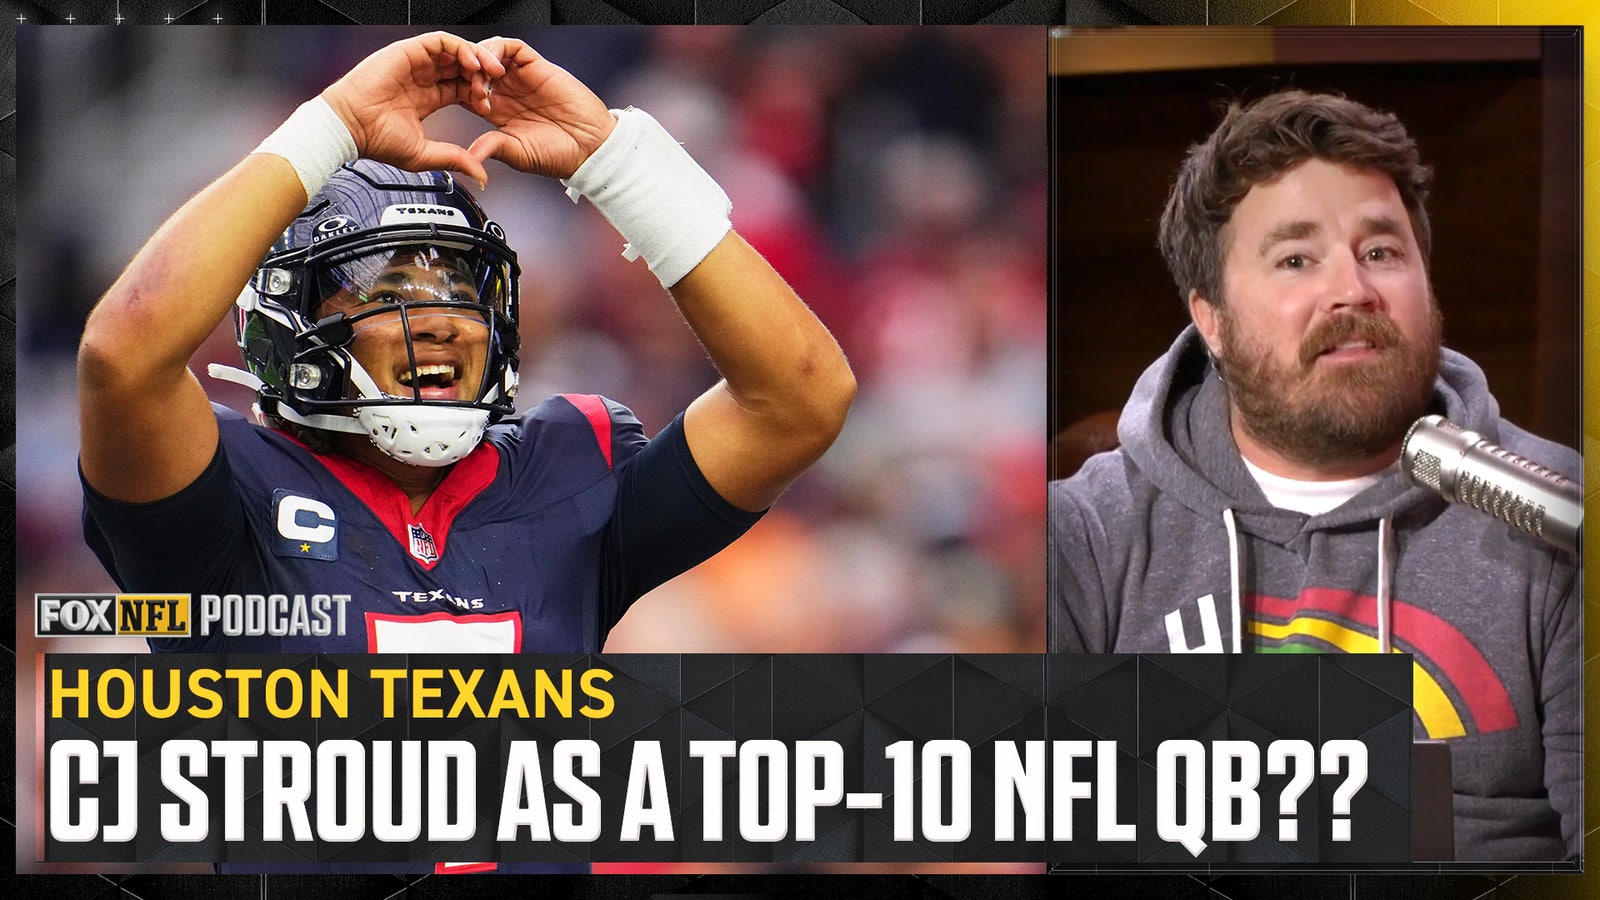 Is Houston Texans' CJ Stroud already making a case for himself as a top-10 NFL QB? 